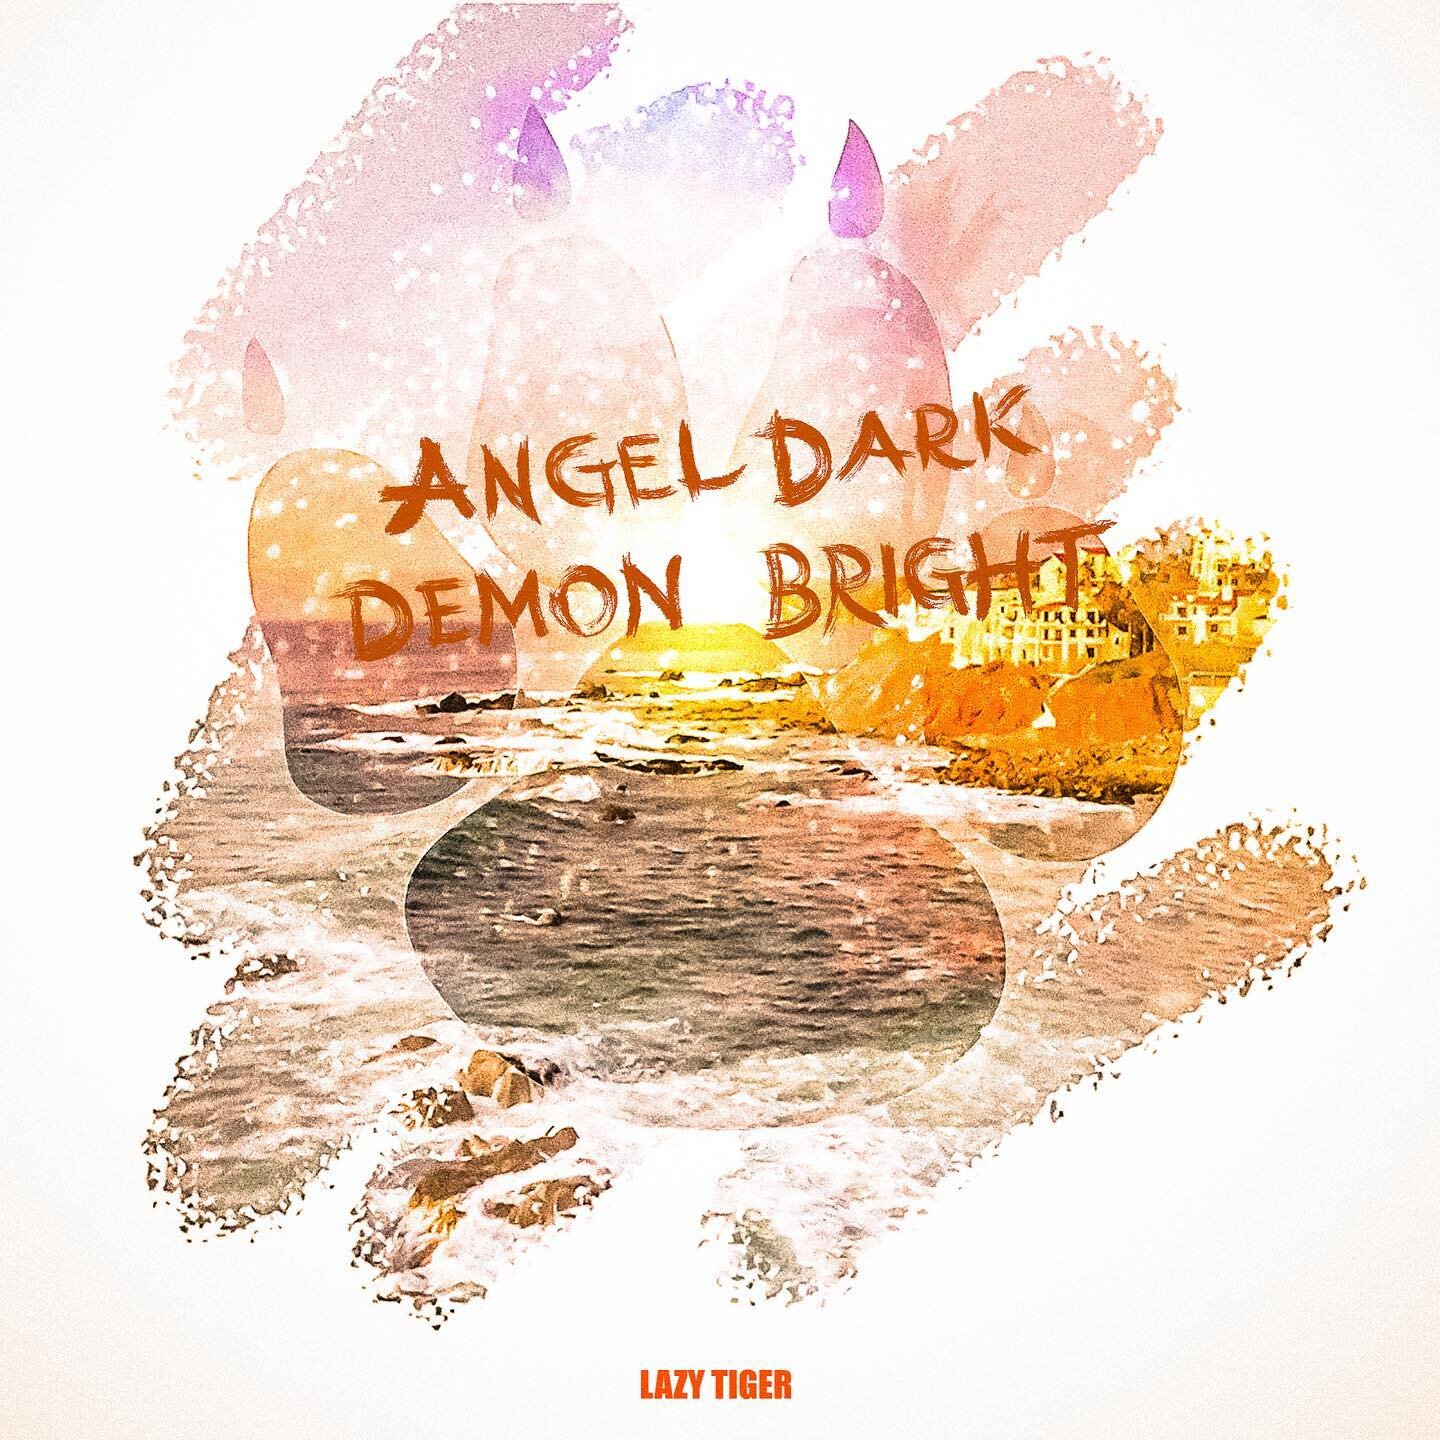 &lsquo;Angel Dark Demon Bright&rsquo; has been out for a month now.. I just wanted to thank again, everyone, including the music outlets that have helped share this project with audiences since the first couple of singles released. Here&rsquo;s some 